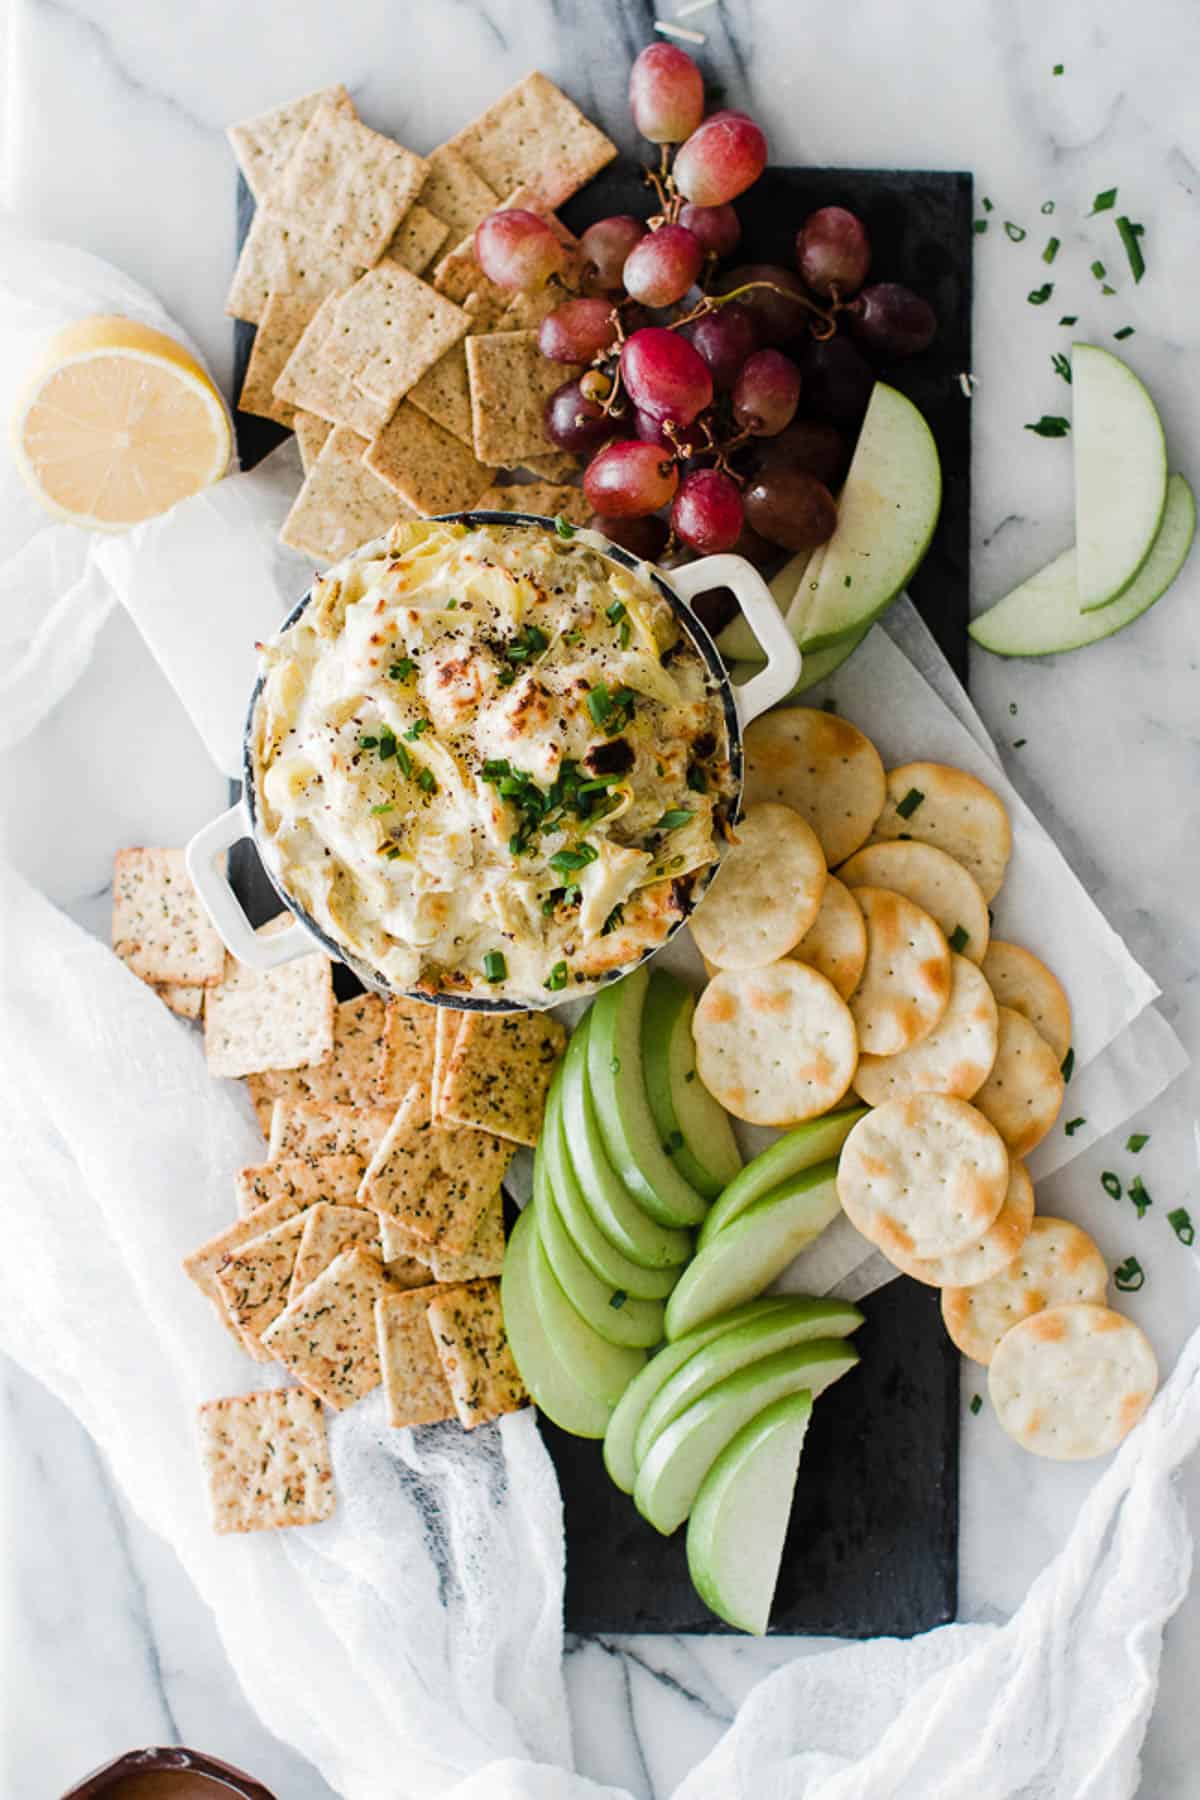 Platter with sliced apples and crackers served with hot artichoke dip.